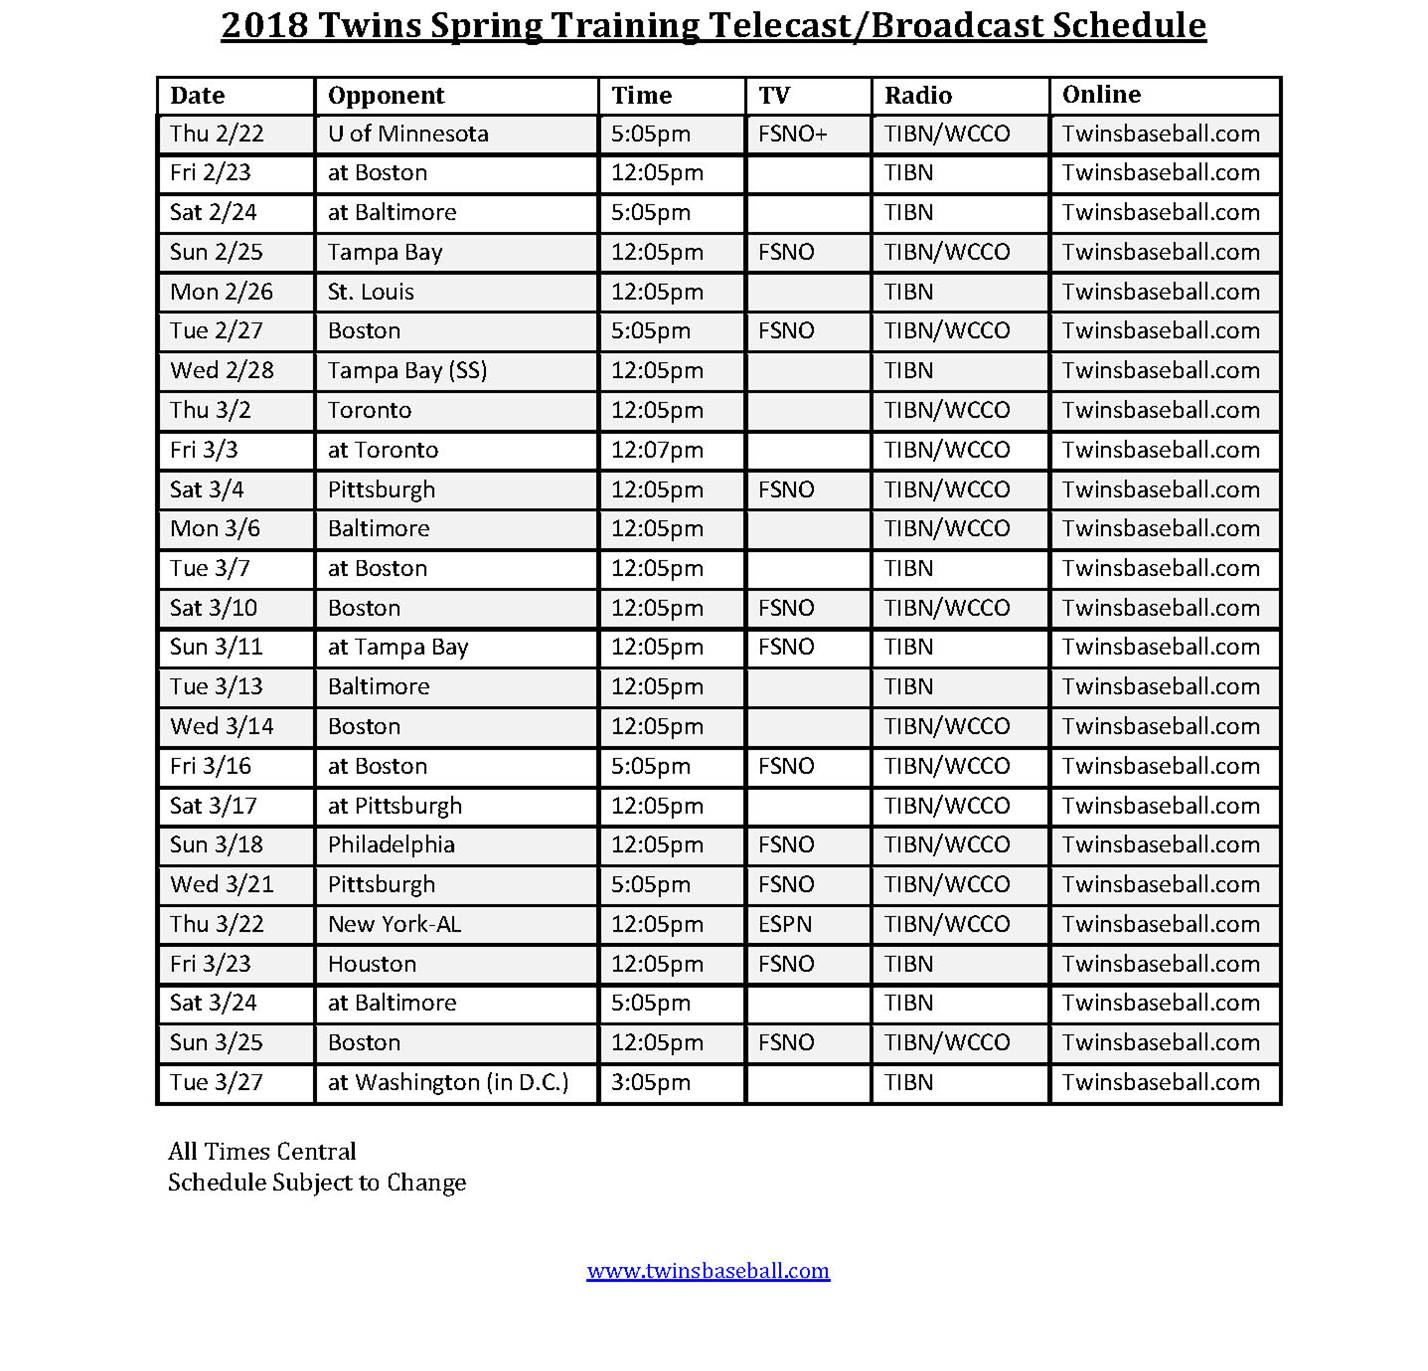 2018 minnesota twins broadcast schedule posted - spring training online